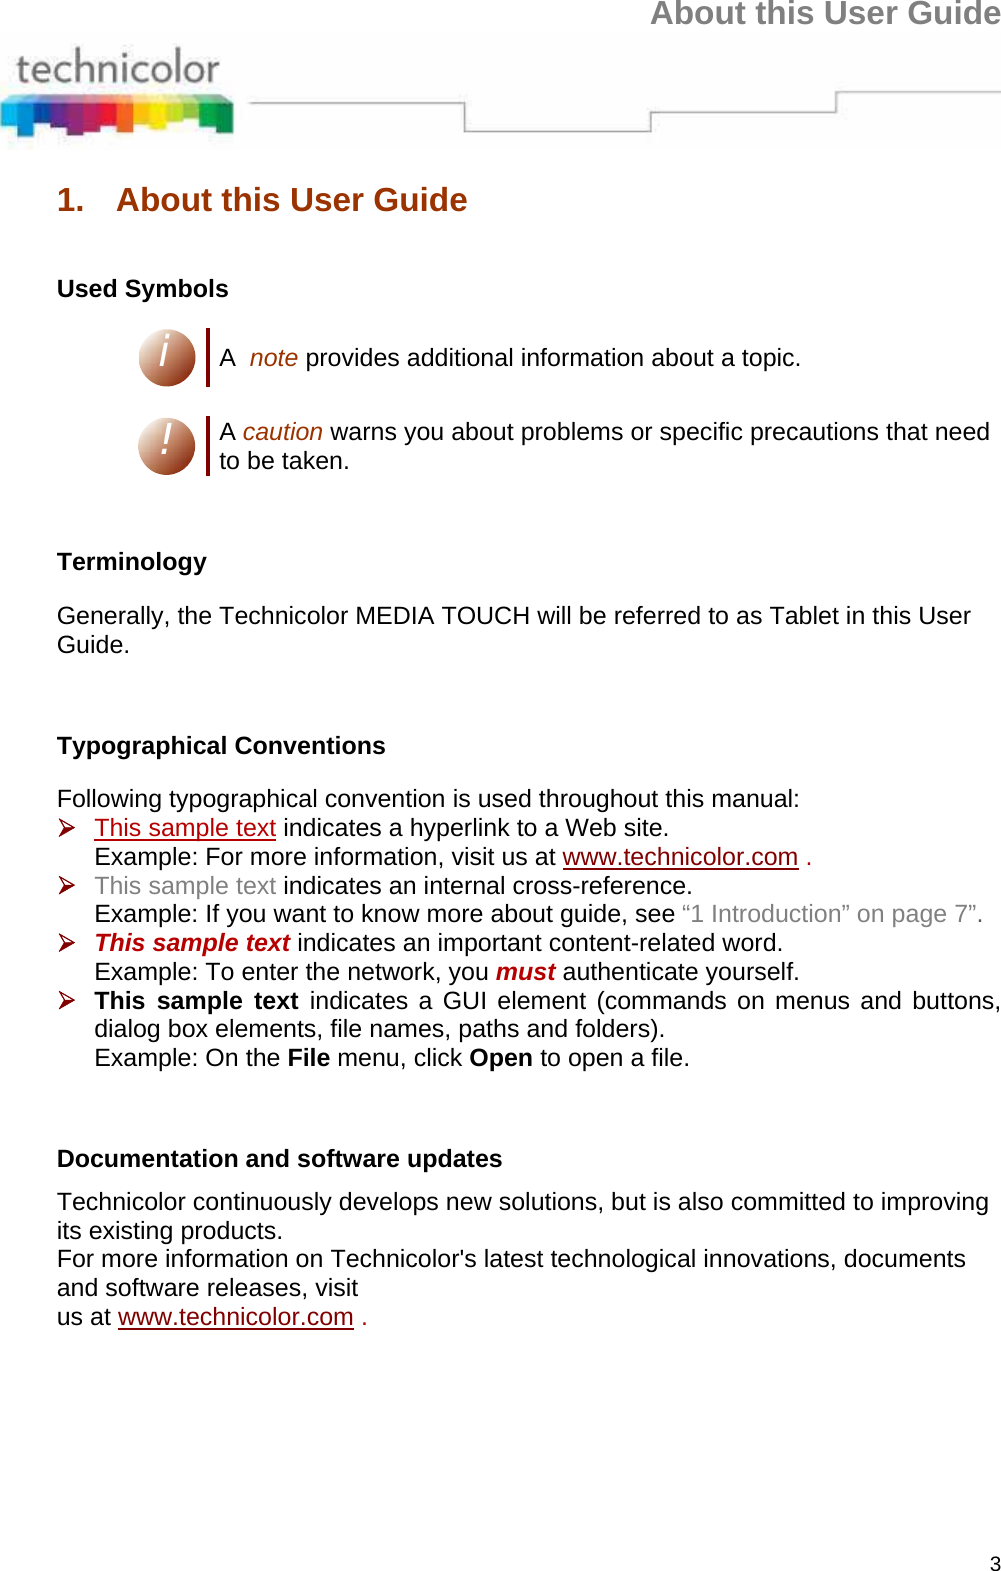 About this User Guide 3 1.  About this User Guide  Used Symbols i A  note provides additional information about a topic.  ! A caution warns you about problems or specific precautions that need to be taken.      Terminology Generally, the Technicolor MEDIA TOUCH will be referred to as Tablet in this User Guide.      Typographical Conventions Following typographical convention is used throughout this manual: ¾ This sample text indicates a hyperlink to a Web site. Example: For more information, visit us at www.technicolor.com . ¾ This sample text indicates an internal cross-reference. Example: If you want to know more about guide, see “1 Introduction” on page 7”. ¾ This sample text indicates an important content-related word. Example: To enter the network, you must authenticate yourself. ¾ This sample text indicates a GUI element (commands on menus and buttons, dialog box elements, file names, paths and folders). Example: On the File menu, click Open to open a file.      Documentation and software updates  Technicolor continuously develops new solutions, but is also committed to improving its existing products. For more information on Technicolor&apos;s latest technological innovations, documents and software releases, visit us at www.technicolor.com .  